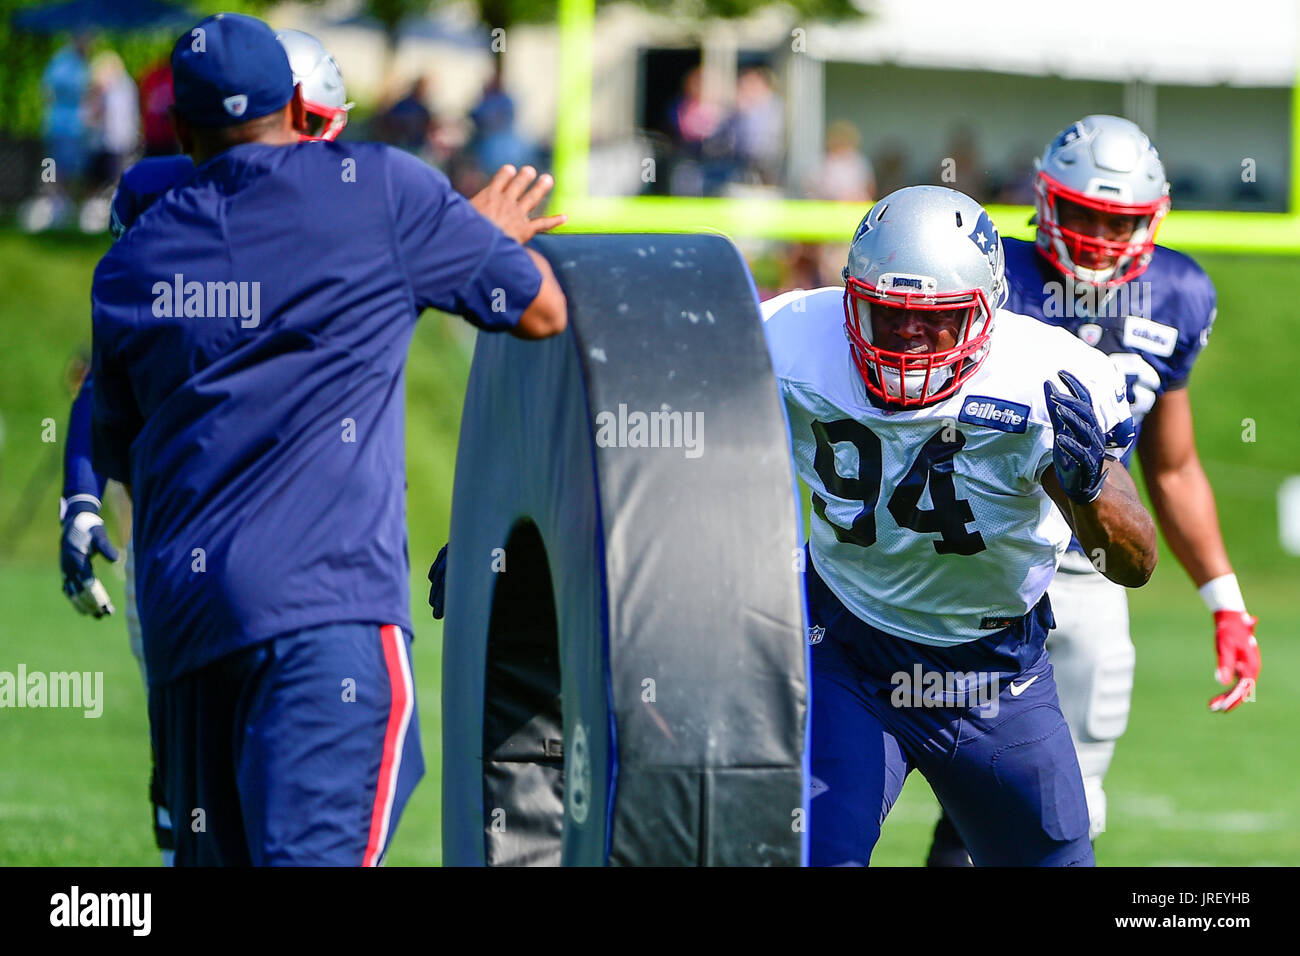 Foxborough, USA. 4th Aug, 2017. New England Patriots defensive end Kony Ealy (94) does a drill at the New England Patriots training camp held at Gillette Stadium, in Foxborough, Massachusetts. Credit: Cal Sport Media/Alamy Live News Stock Photo